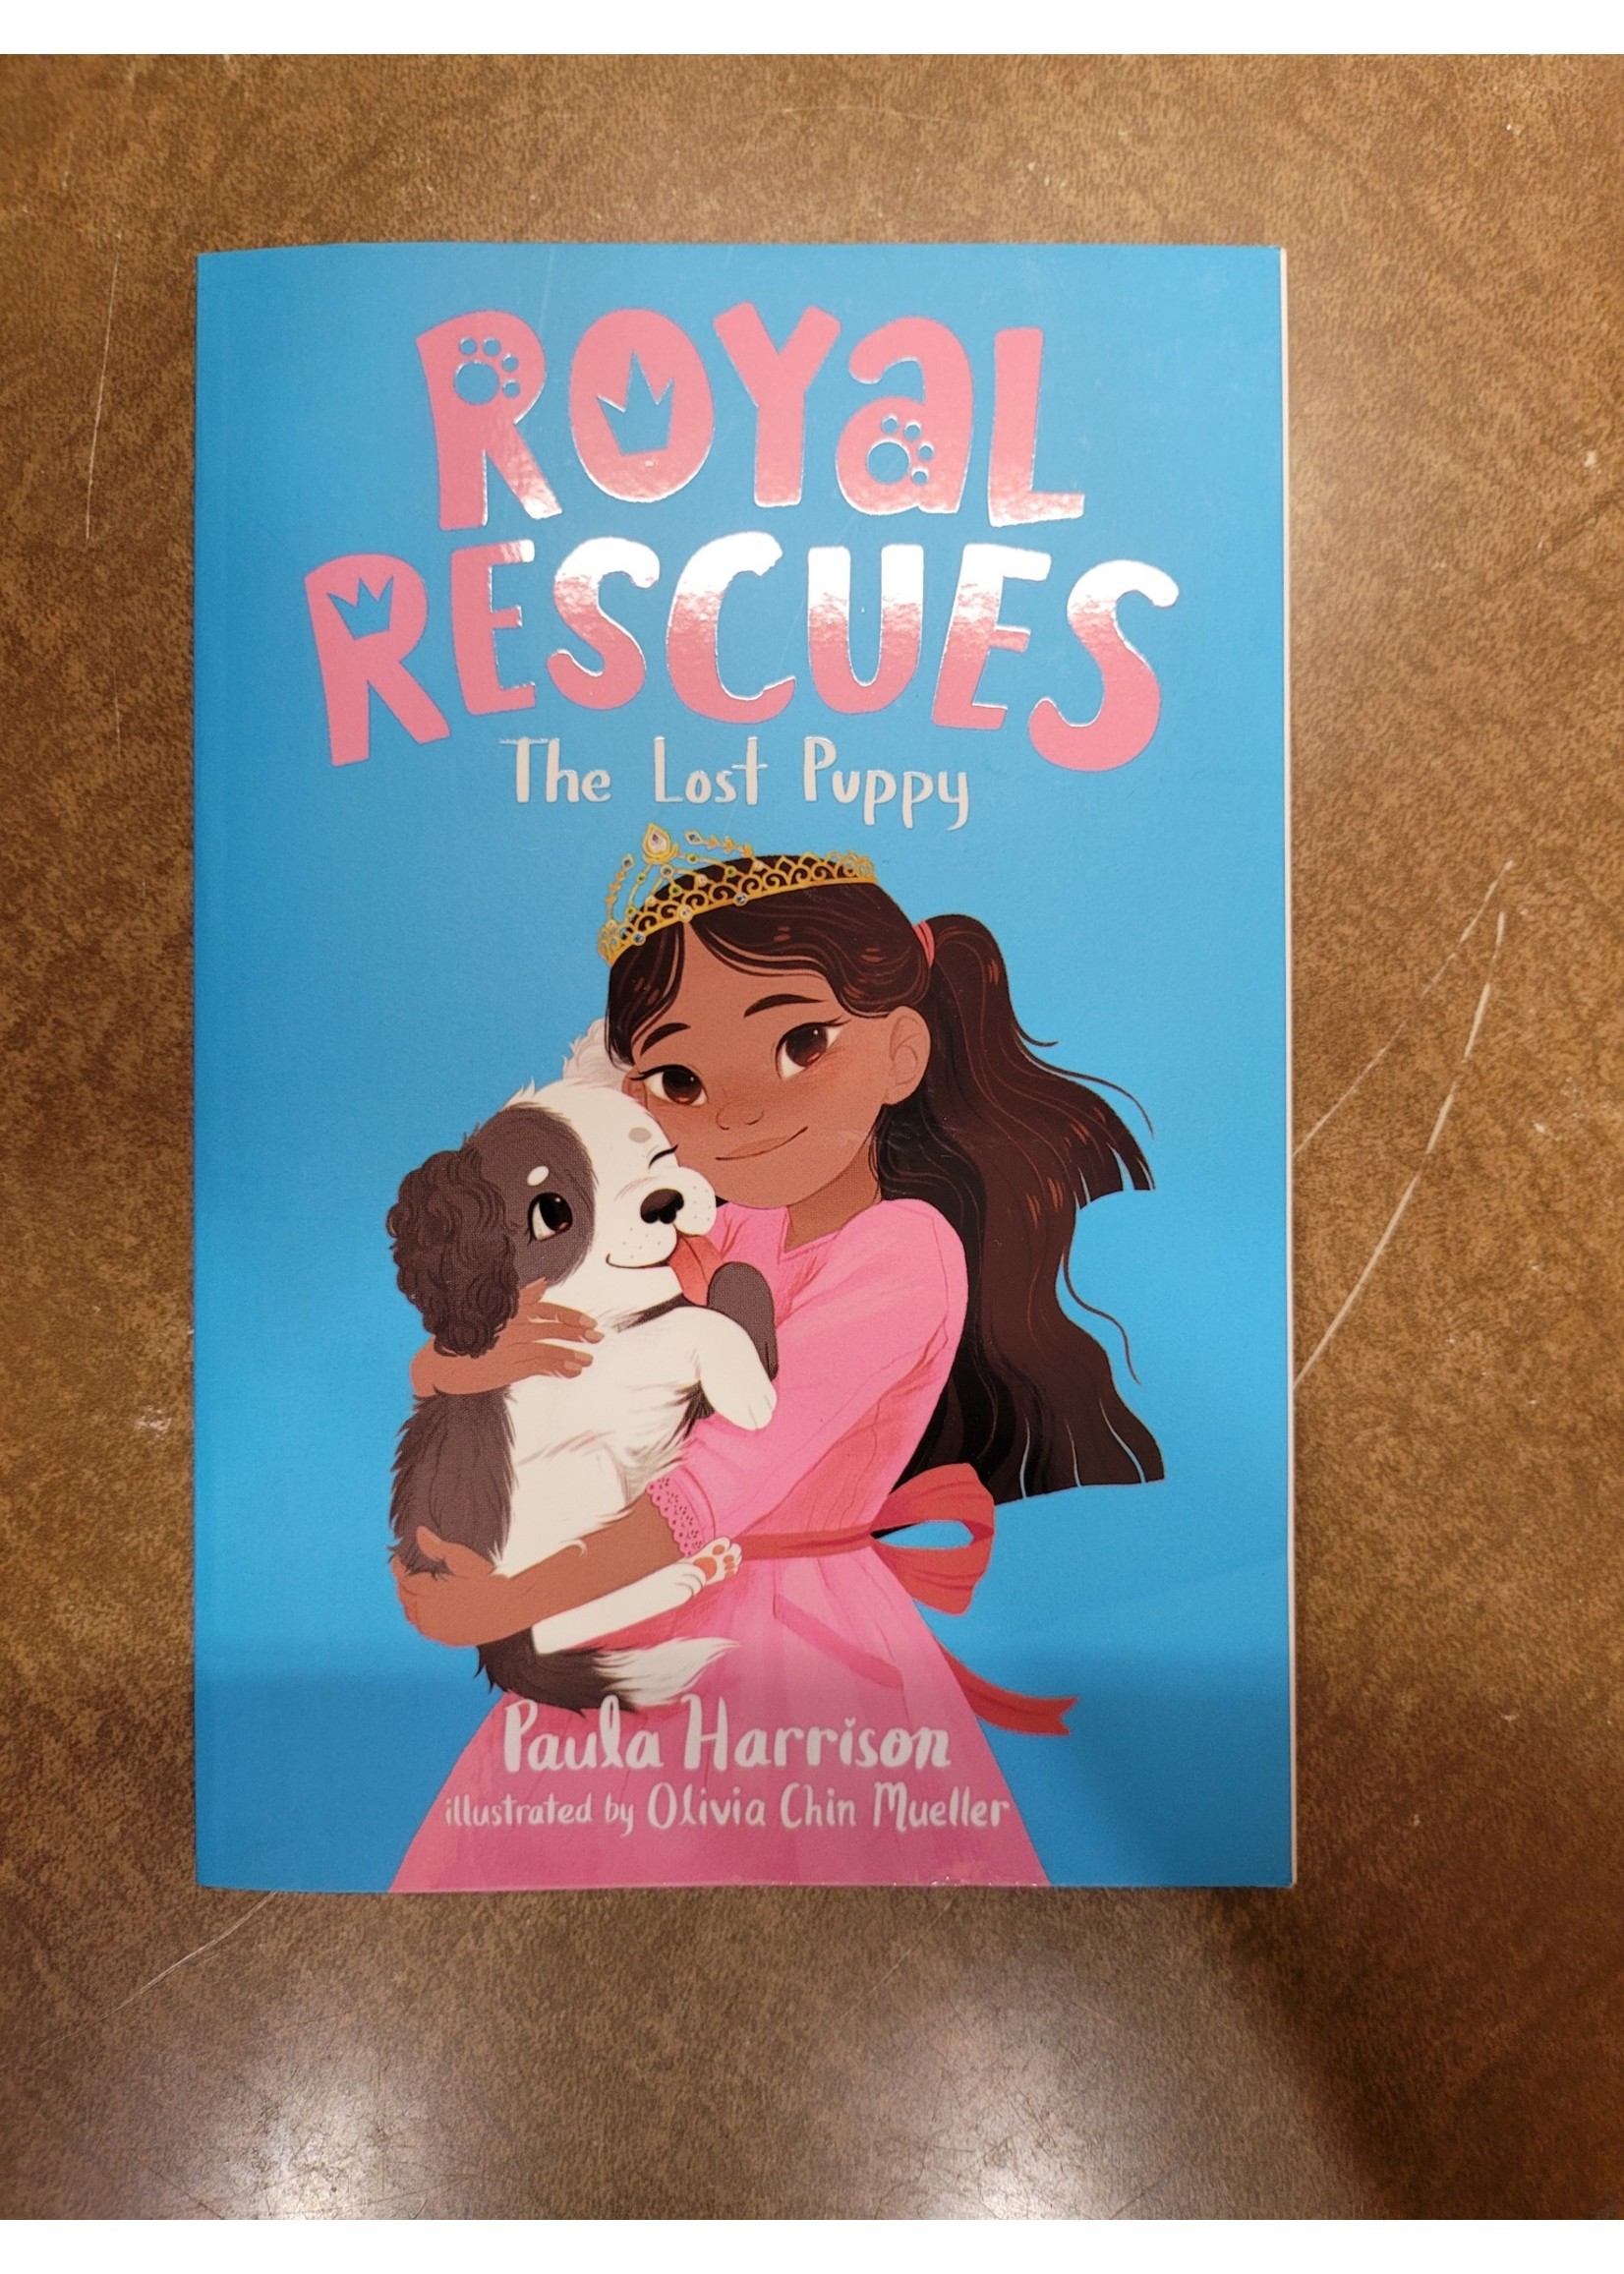 Royal Rescues #2: The Lost Puppy - by Paula Harrison (Paperback)